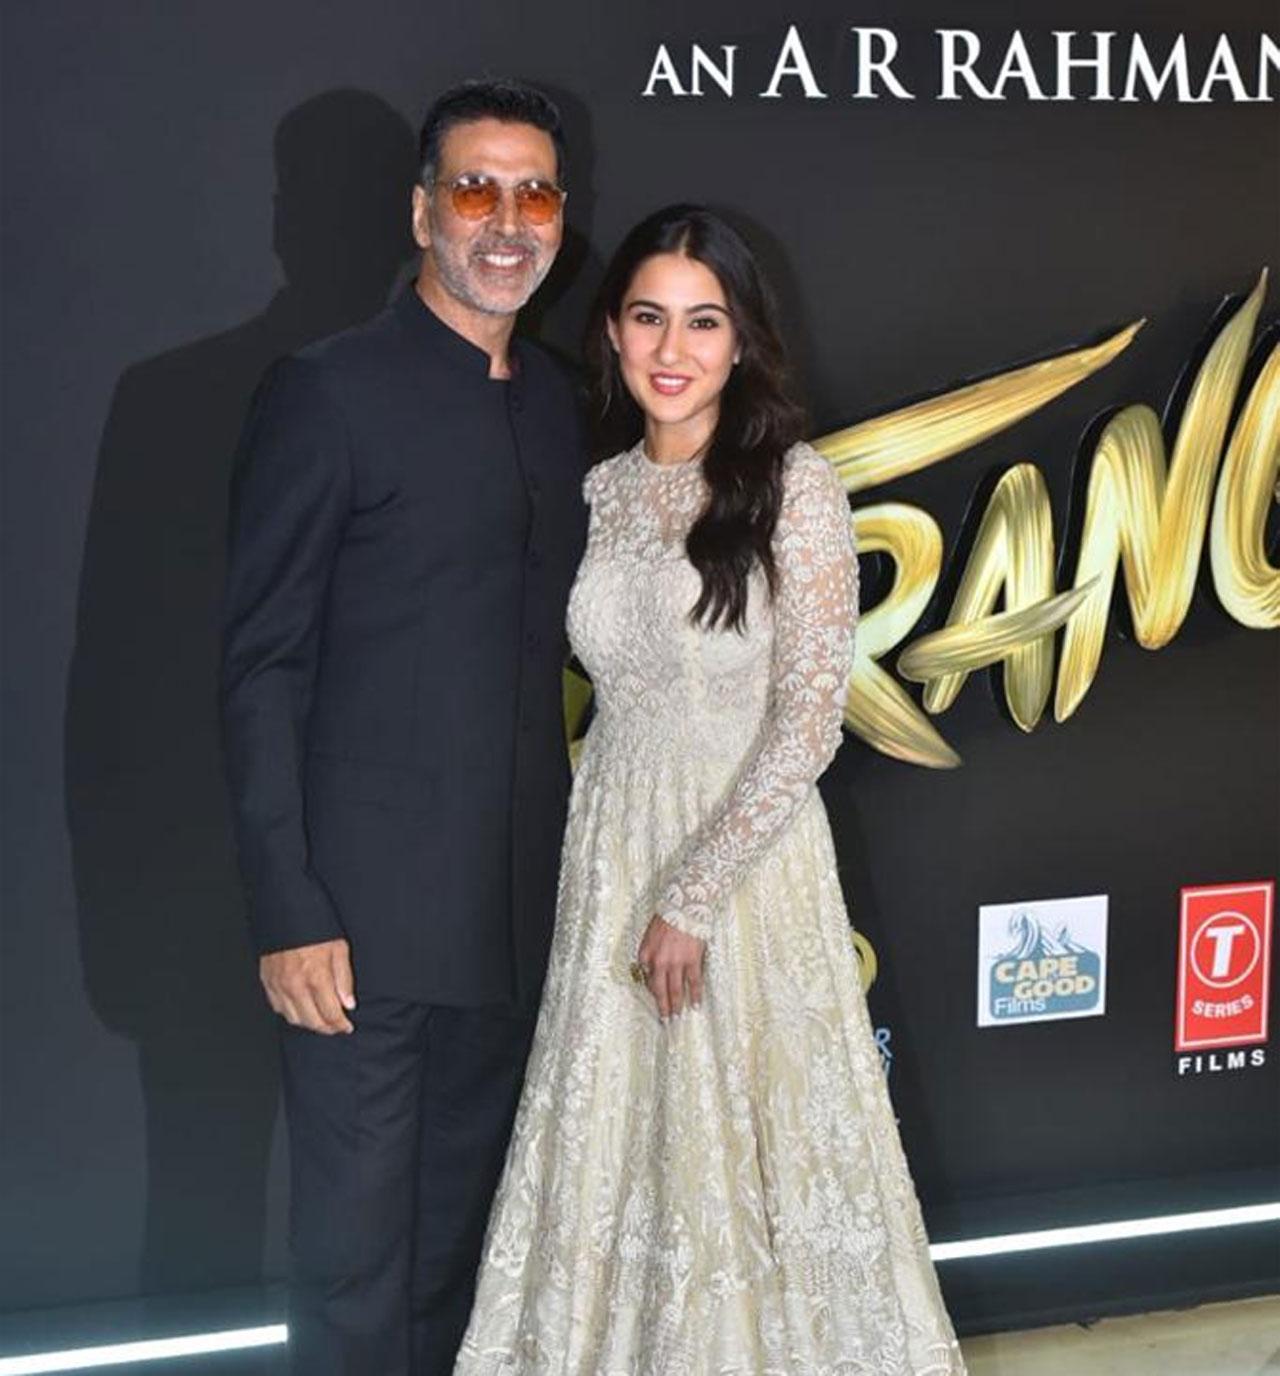 Akshay Kumar and Sara Ali Khan were all smiles at the music launch of their upcoming film Atrangi Re. Details of Kumar's role have been kept under wraps. The star looked dapper in a black suit and Sara shone in her traditional avatar.